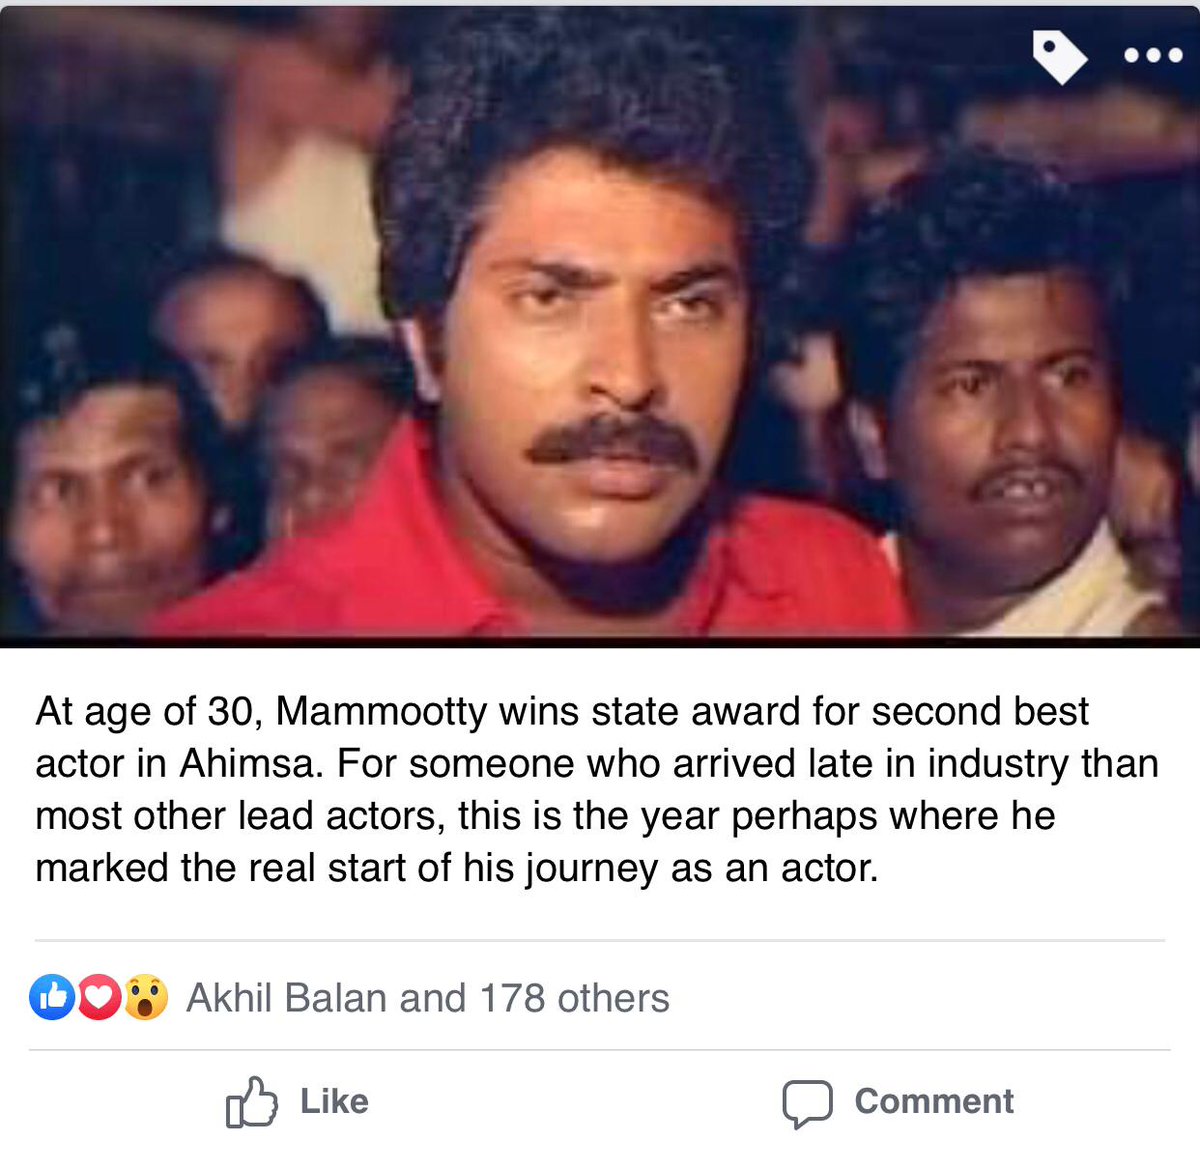  @mammukka through the years:My craze for this man continues... How Mammootty has found ways to remain consistent over years - Read through pics! (1/7) @Forumkeralam1  @Anchuu__  @MalayalamReview  @GK_Newdelhi  @mfwaikerala  @dulQuer